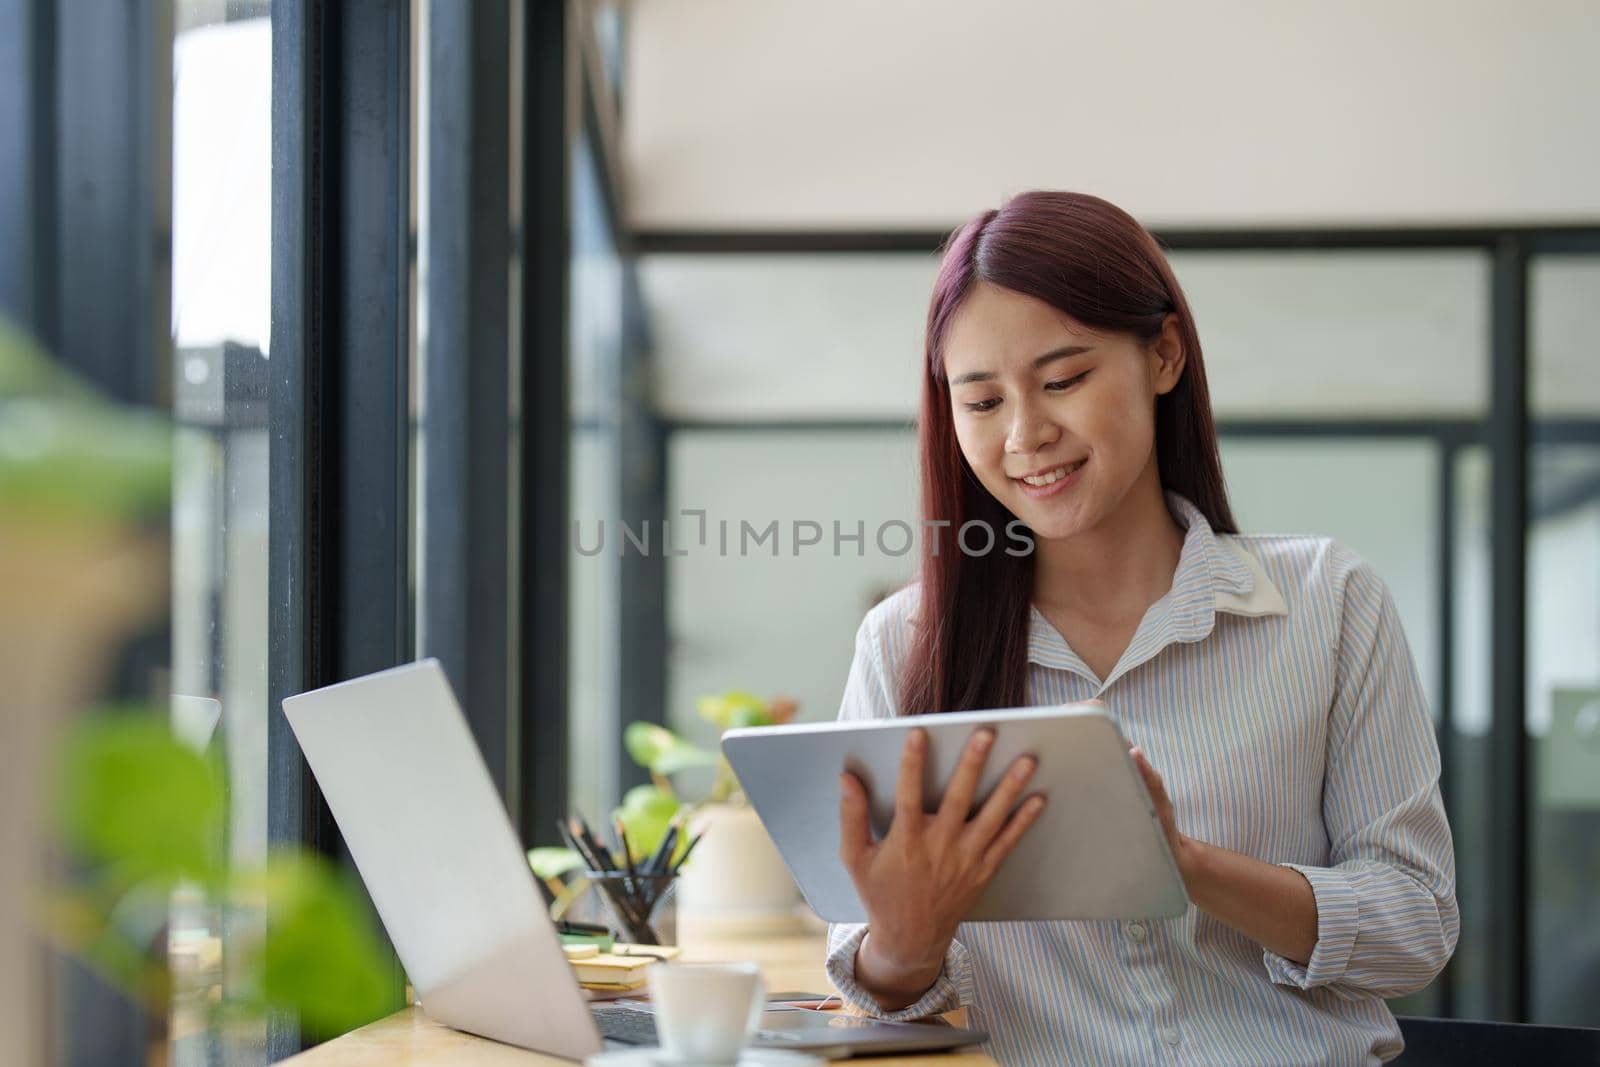 Portrait of an Asian female employee using a tablet computer to work to gather information and analyze marketing plans and investment budgets to increase company profits.